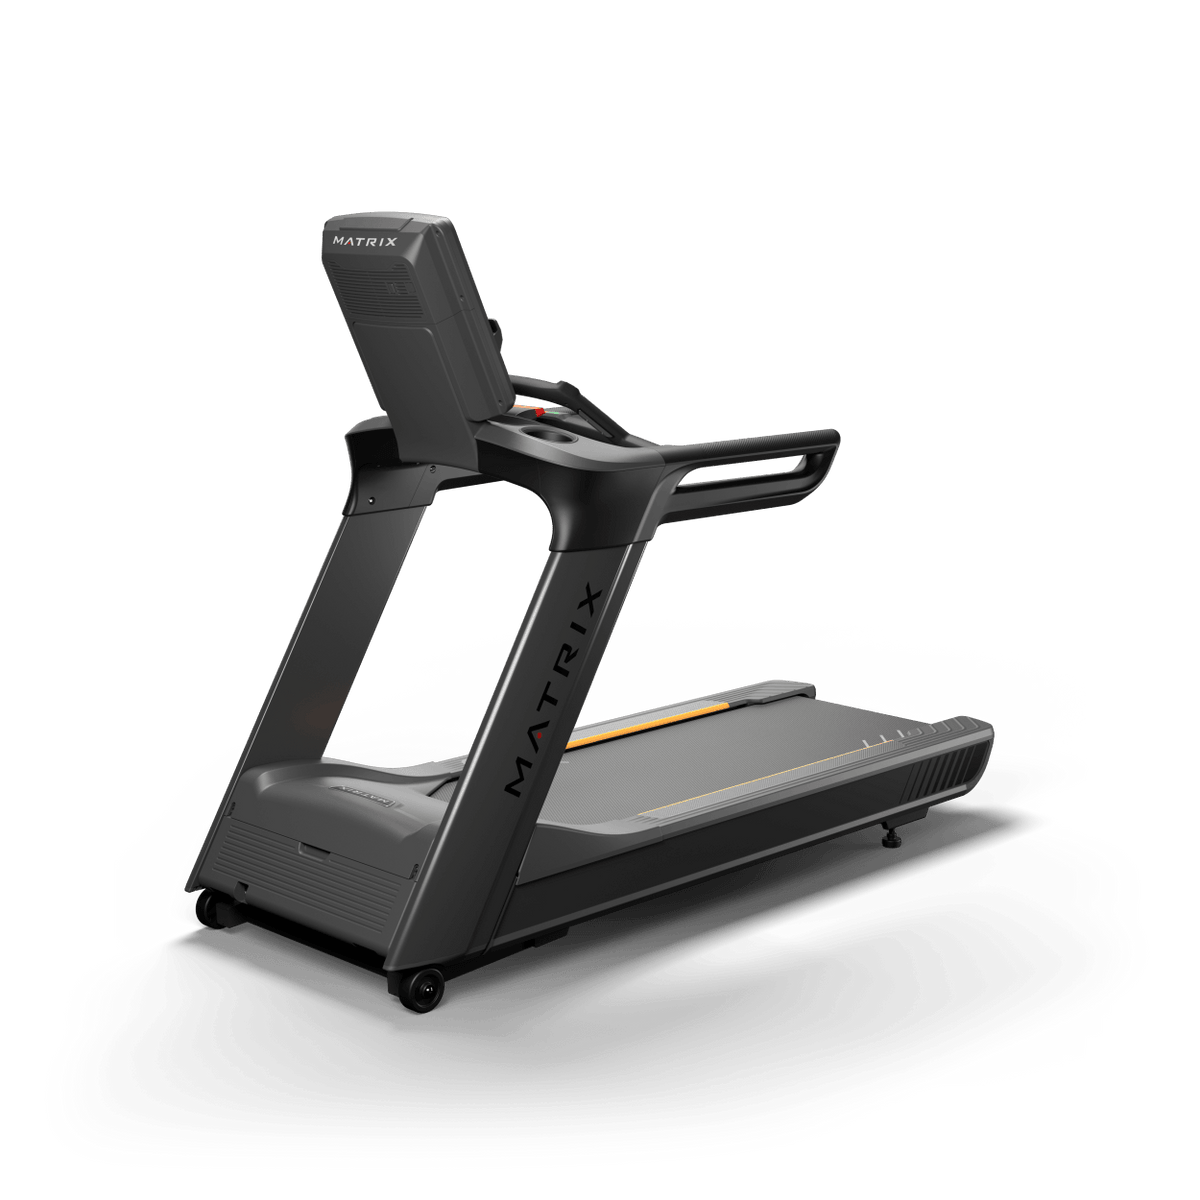 Matrix Performance Treadmill with Premium LED Console rear view | Fitness Experience